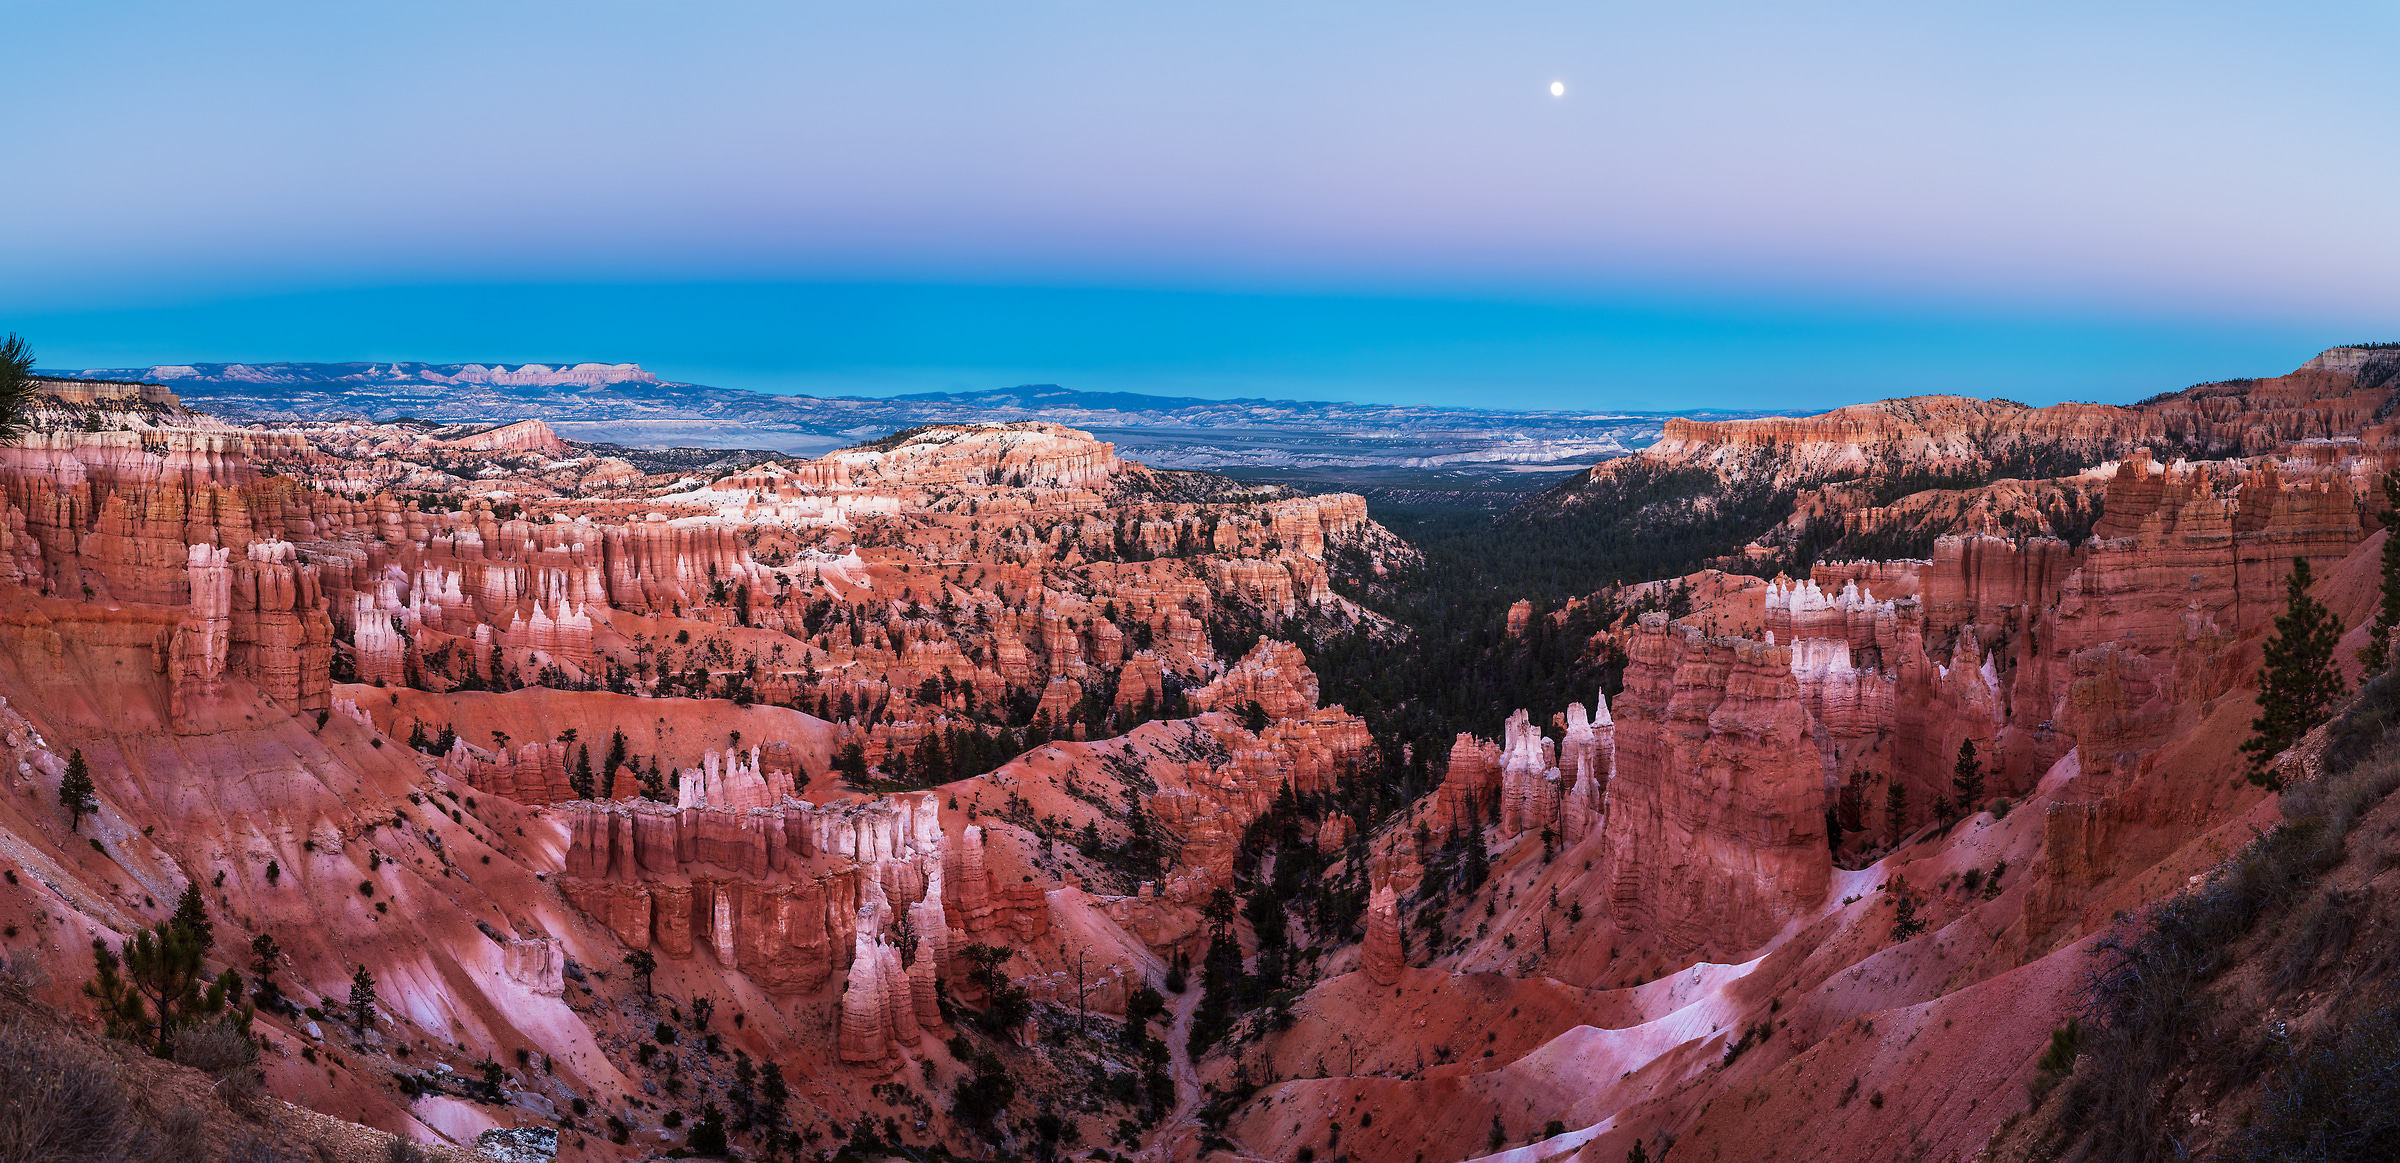 205 megapixels! A very high resolution, large-format VAST photo print of the American West at evening; landscape photograph created by Jim Tarpo in Bryce Canyon, Utah.